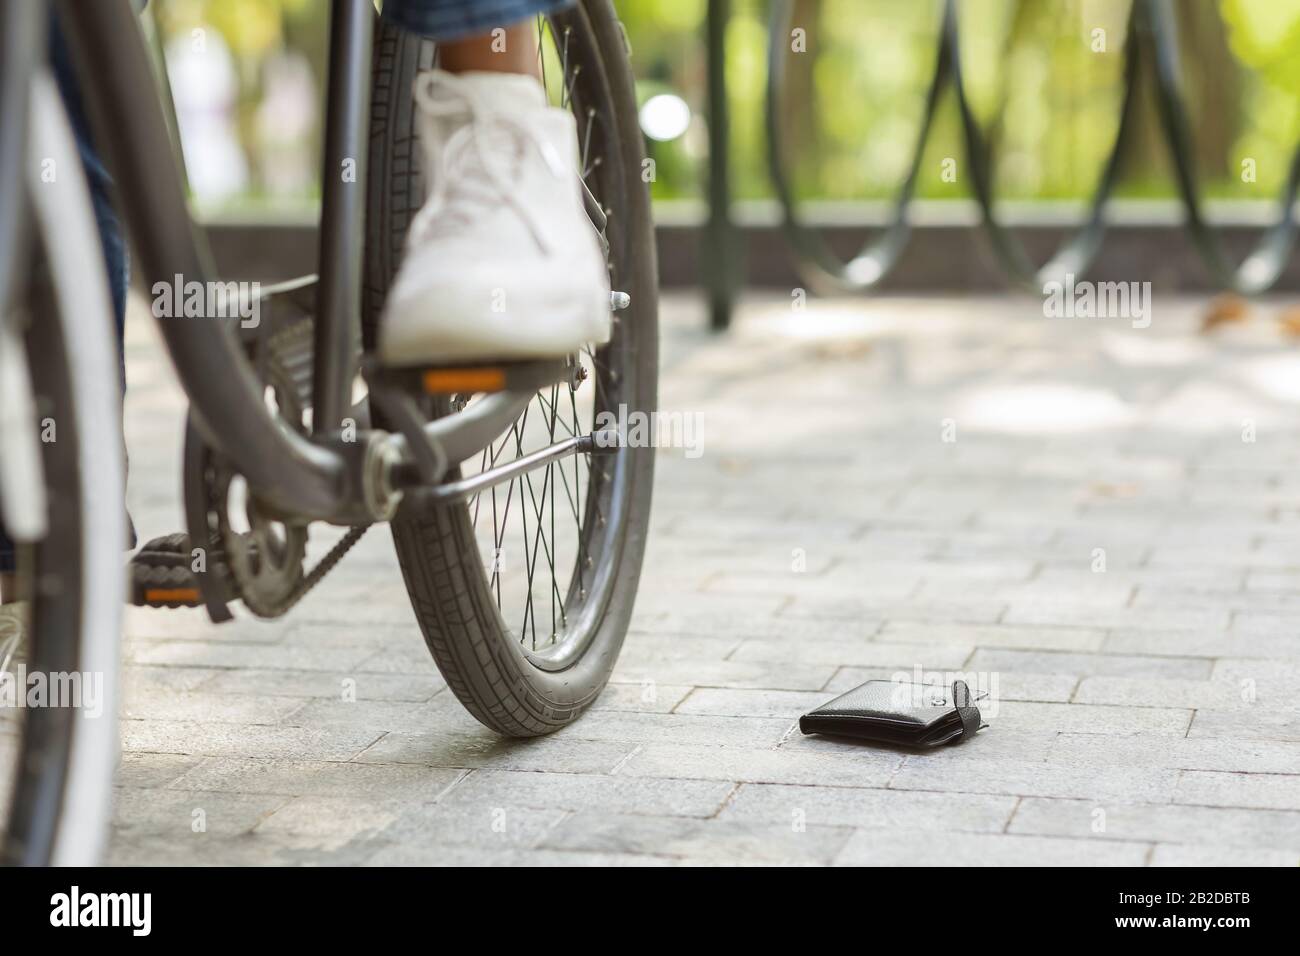 Money Lost. Unrecognizable Black Man Dropped His Wallet While Riding Bicycle Stock Photo